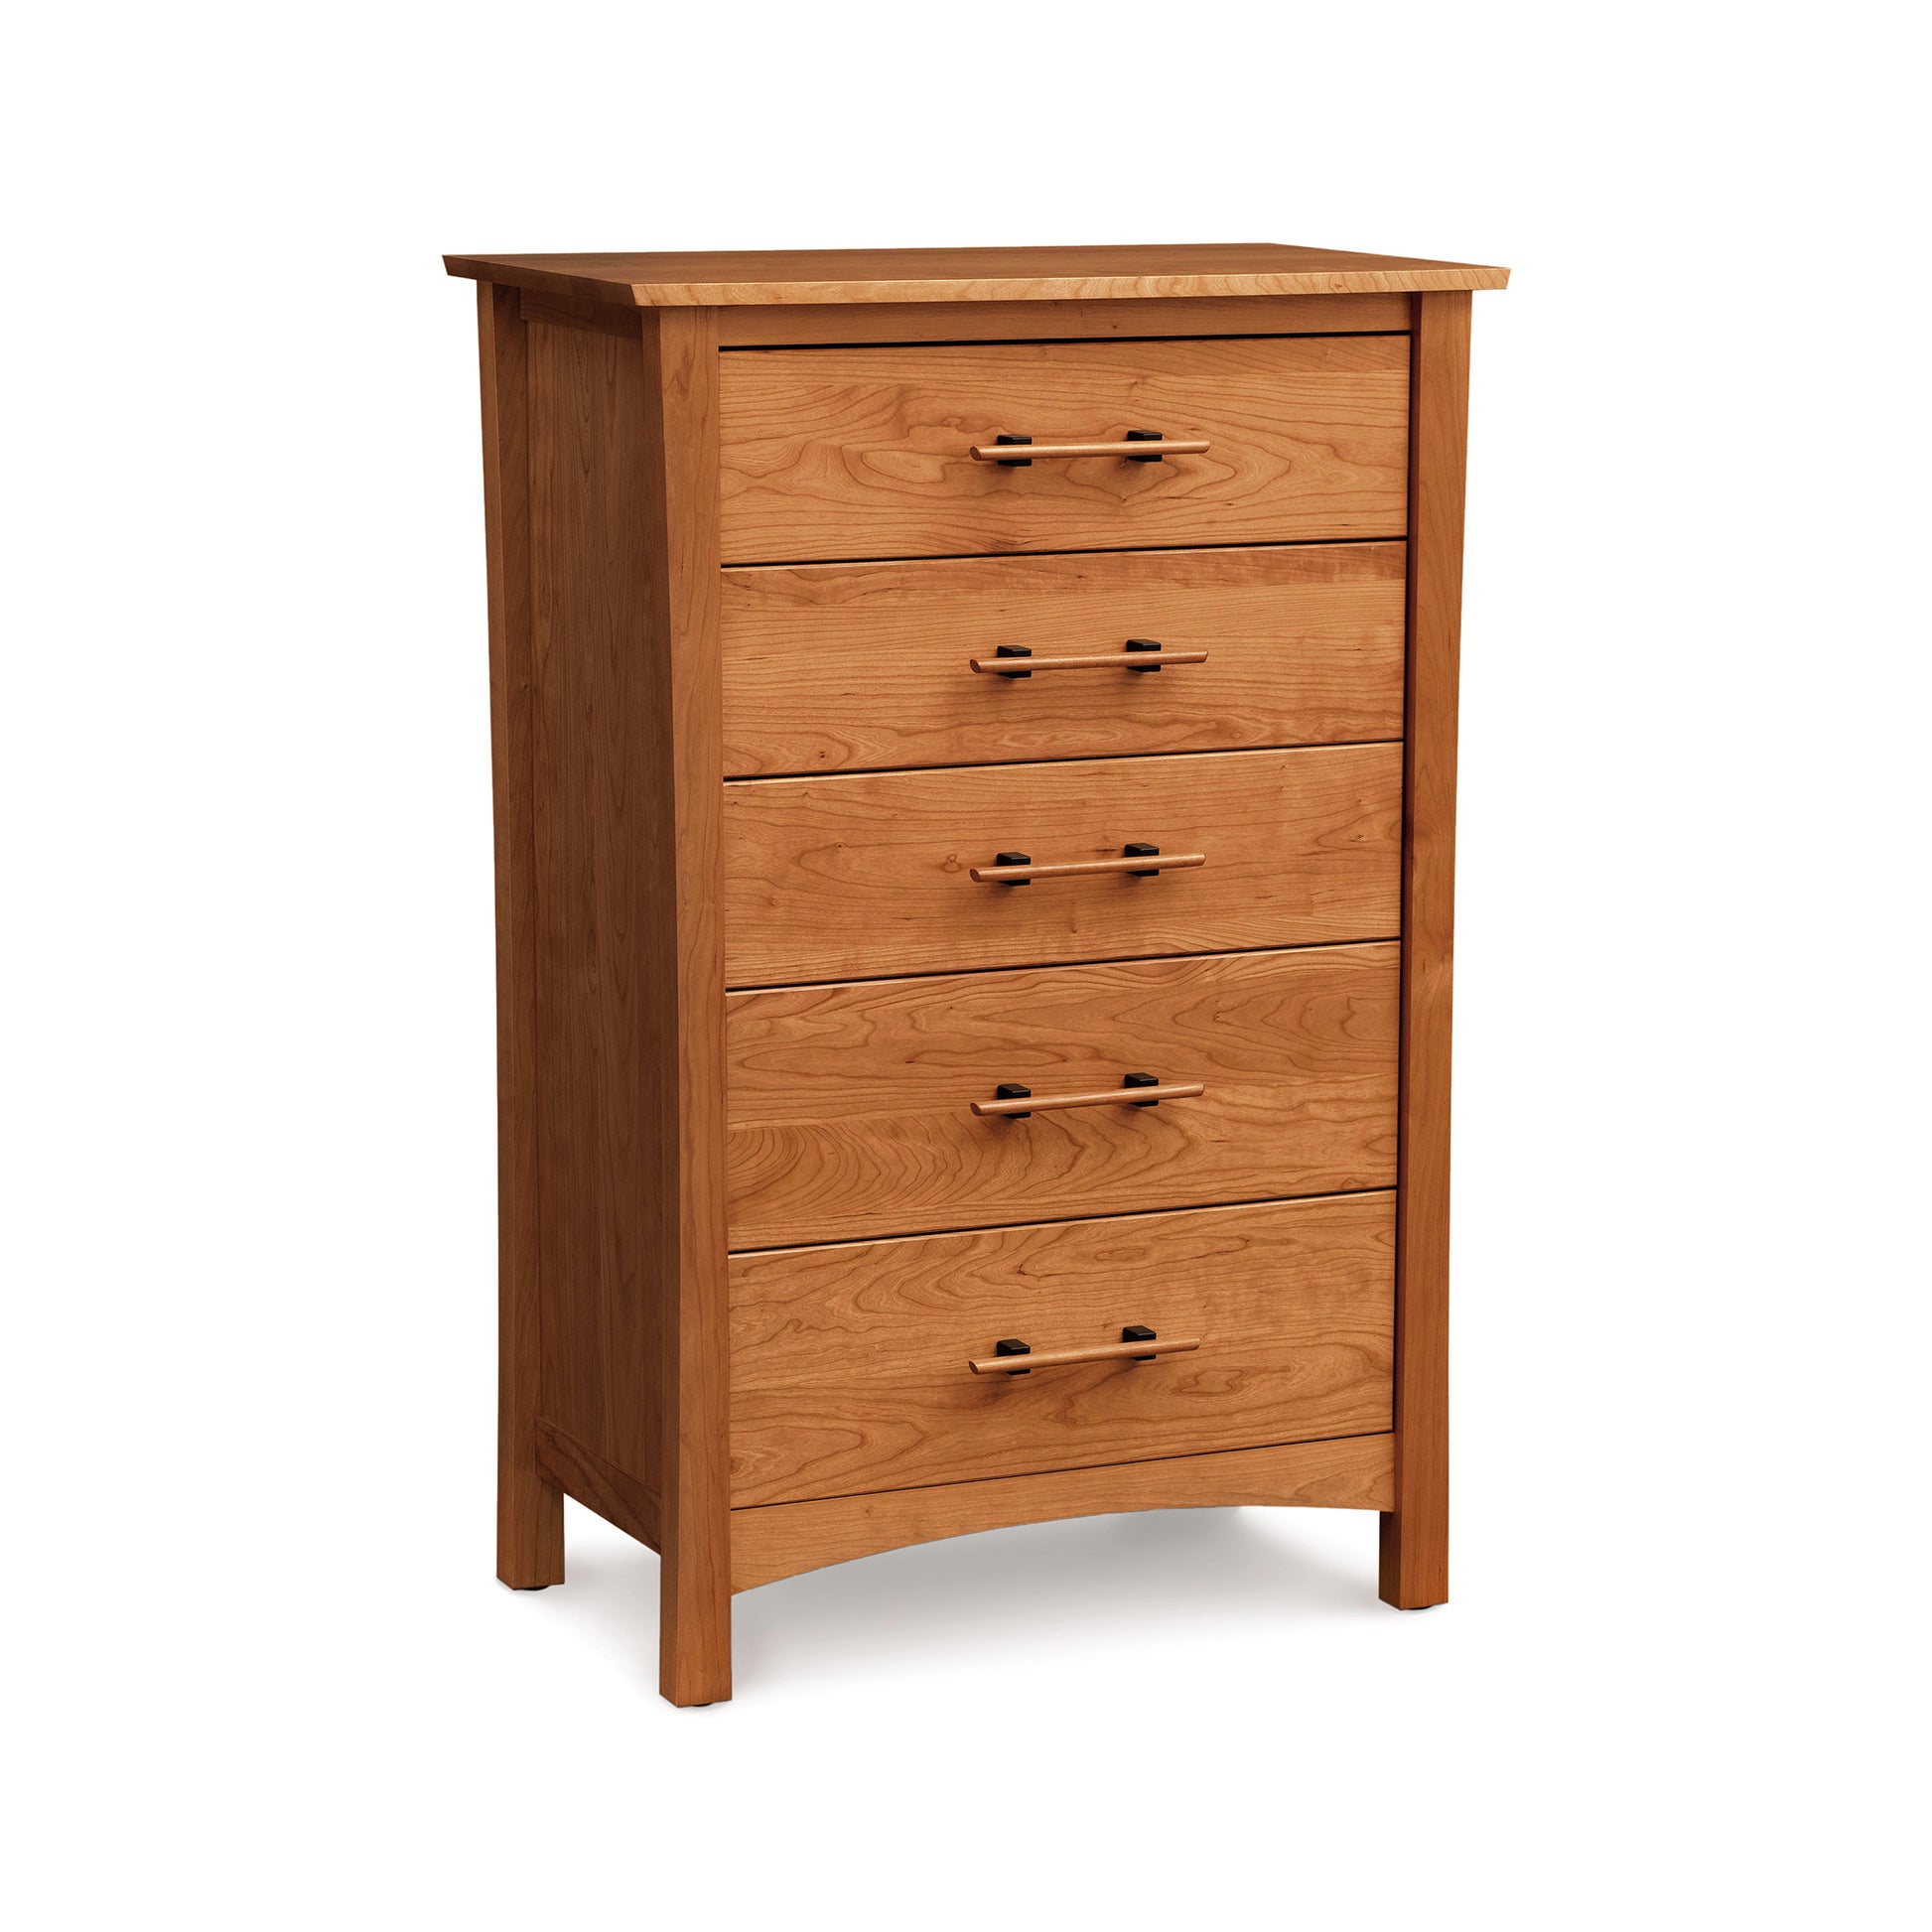 A Copeland Furniture Monterey 5-Drawer Chest of drawers on a white background.